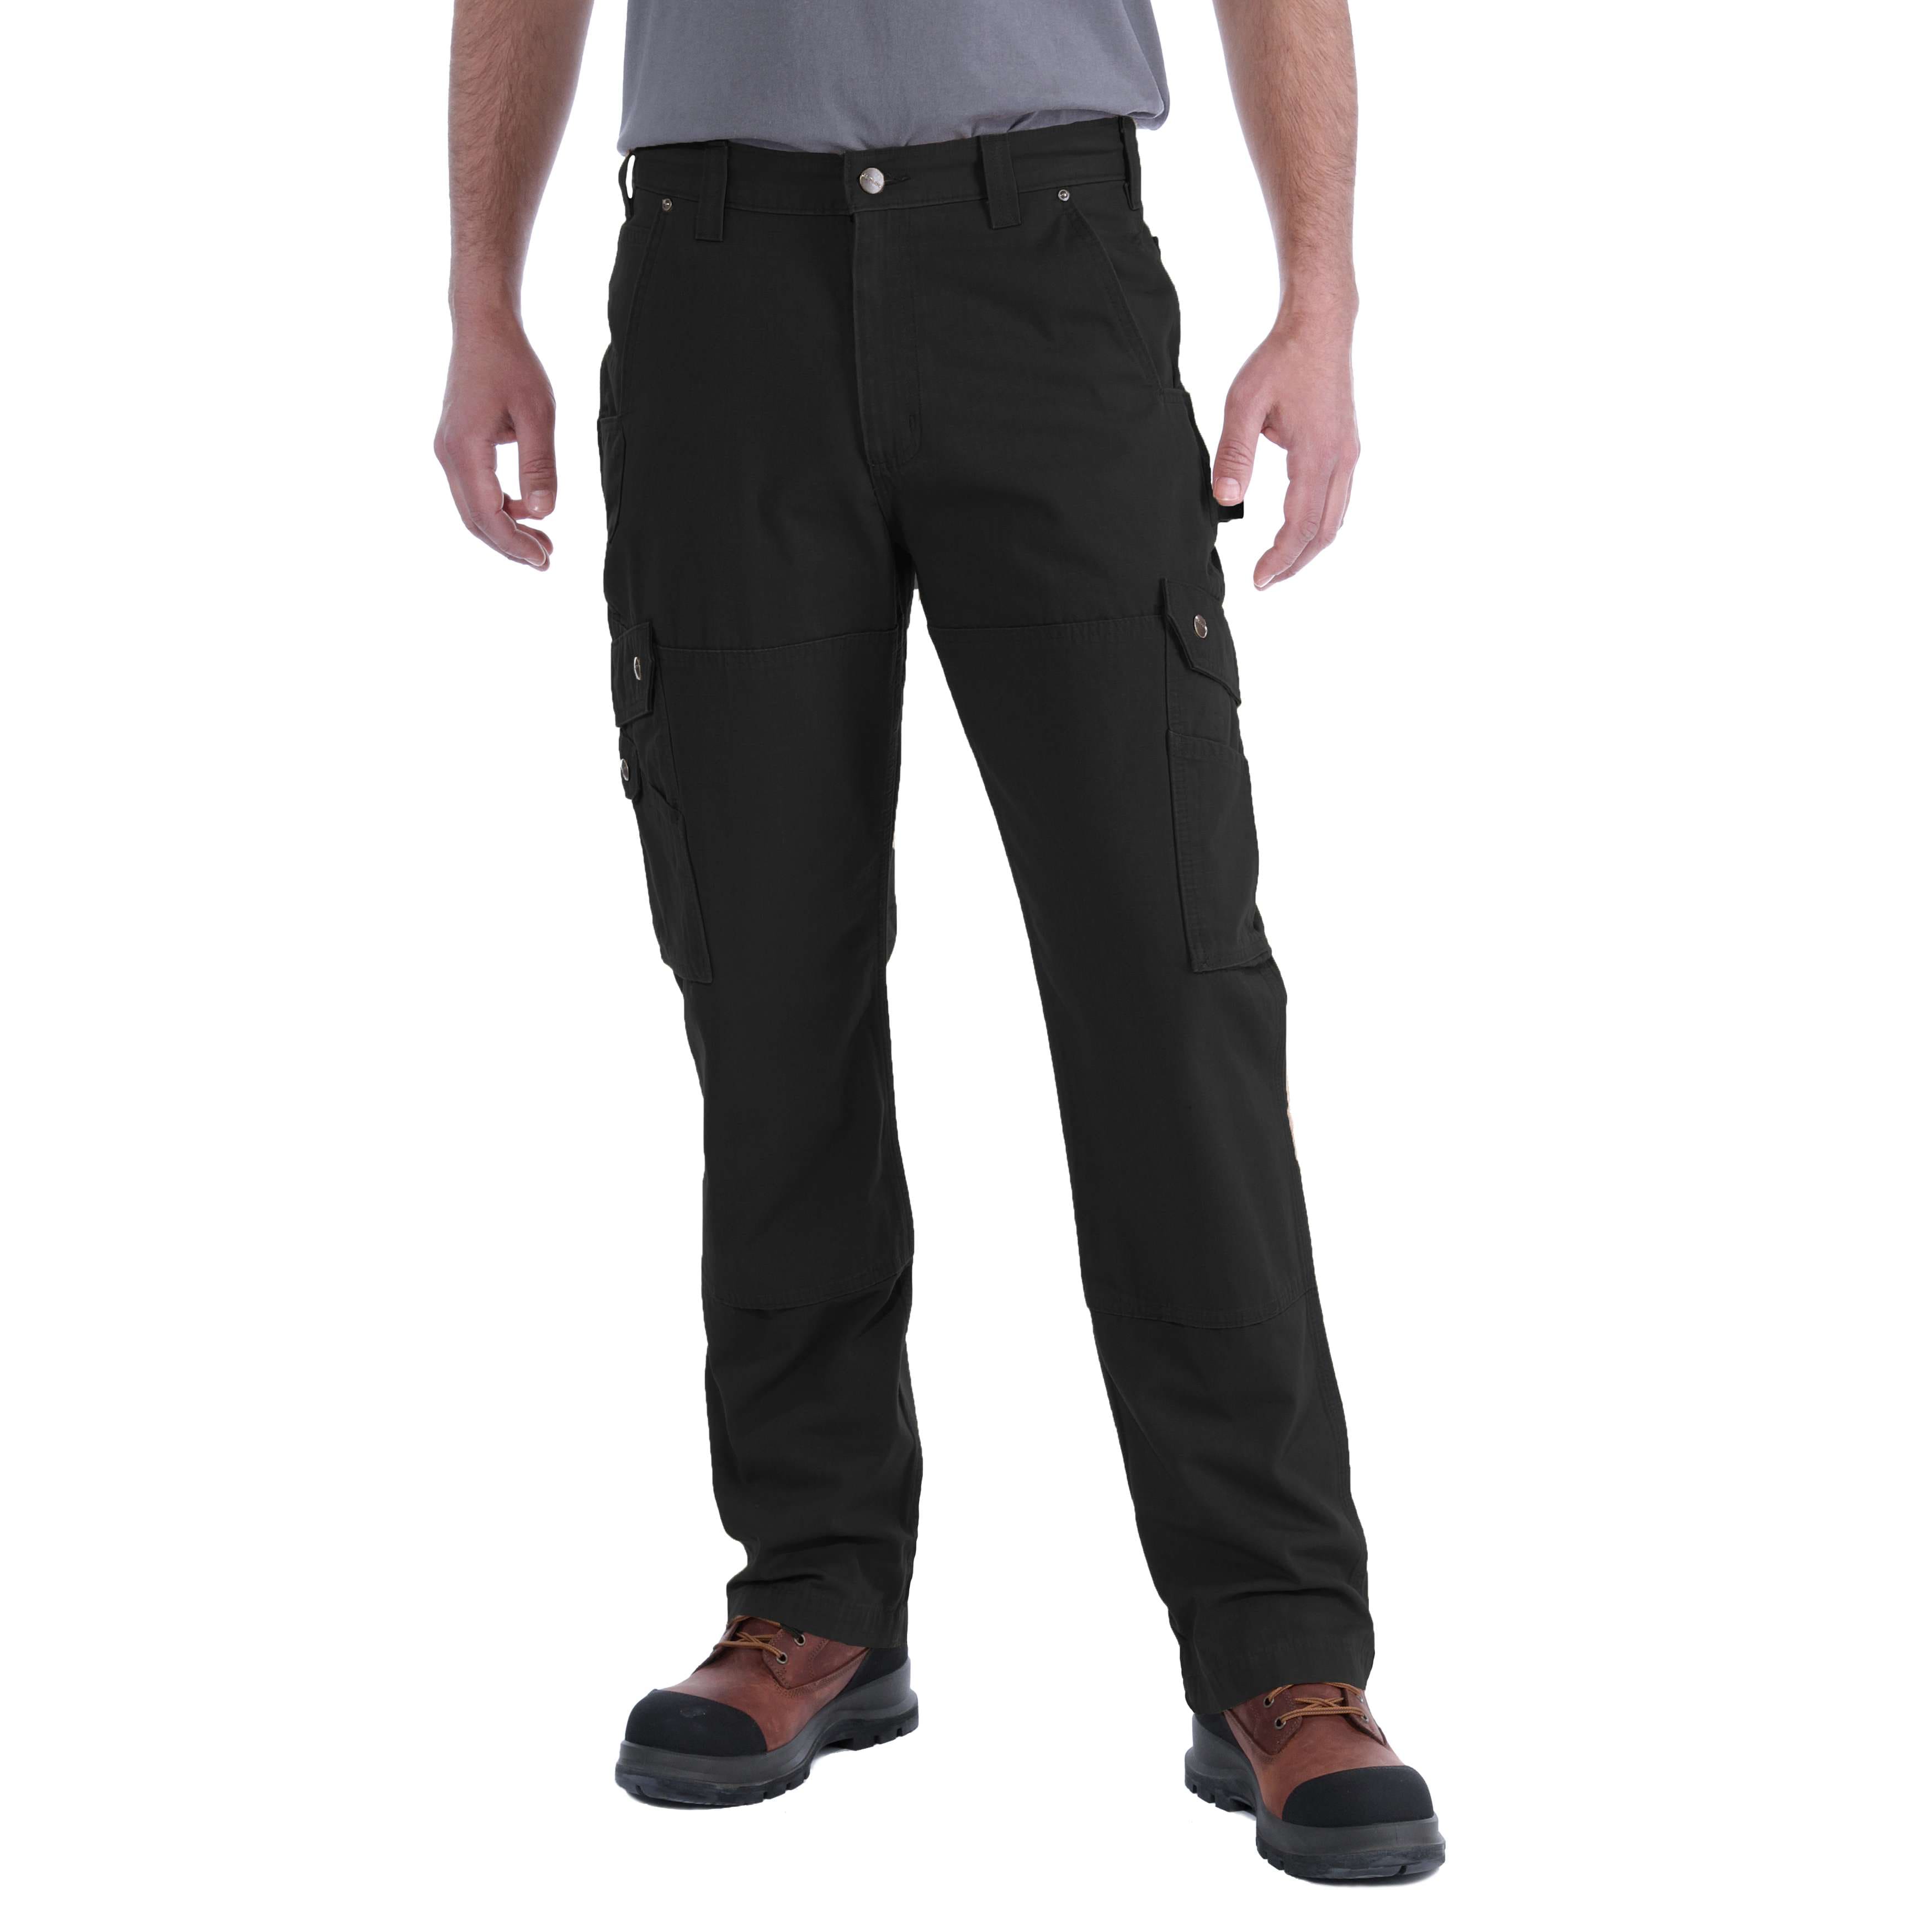 RELAXED FIT RIPSTOP CARGO WORK PANT